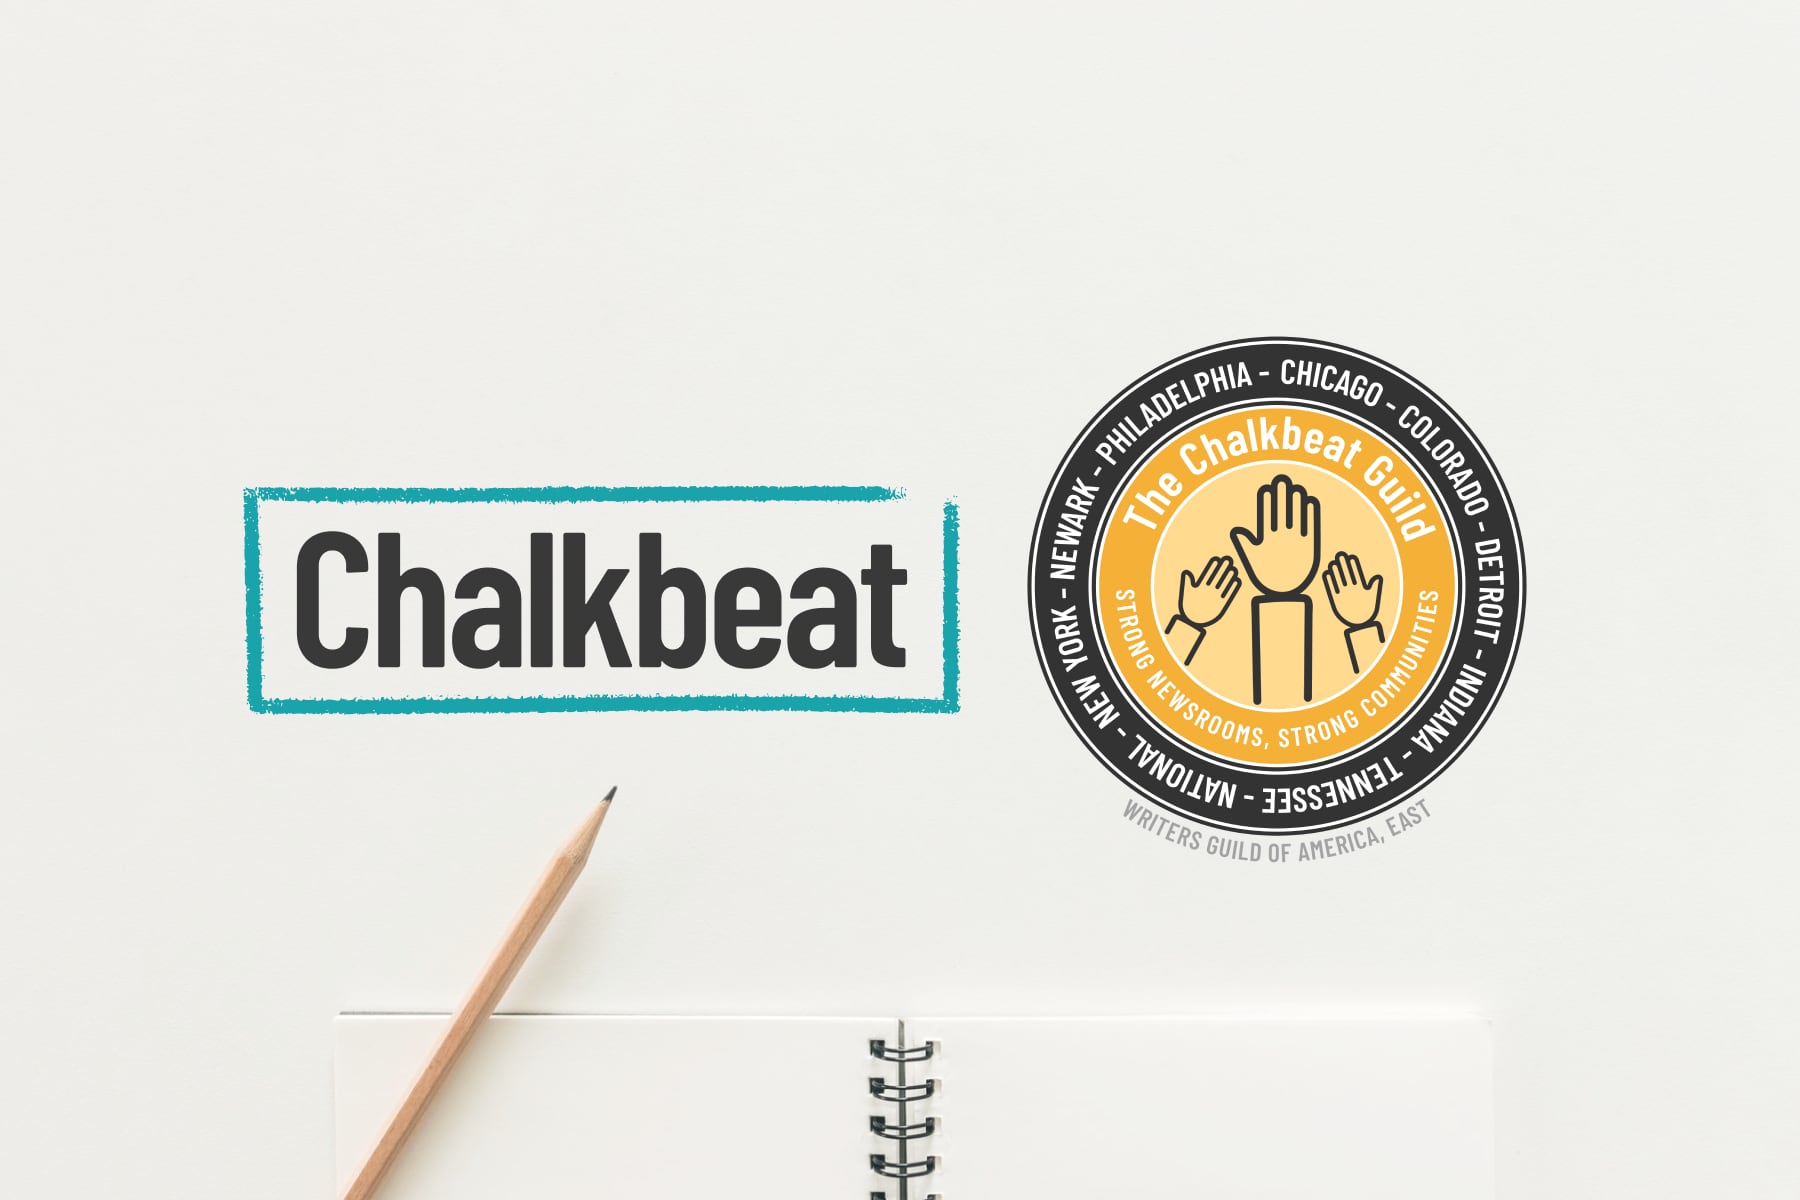 Chalkbeat logo and The Chalkbeat Guild logo and a pencil and notebook against a white background.